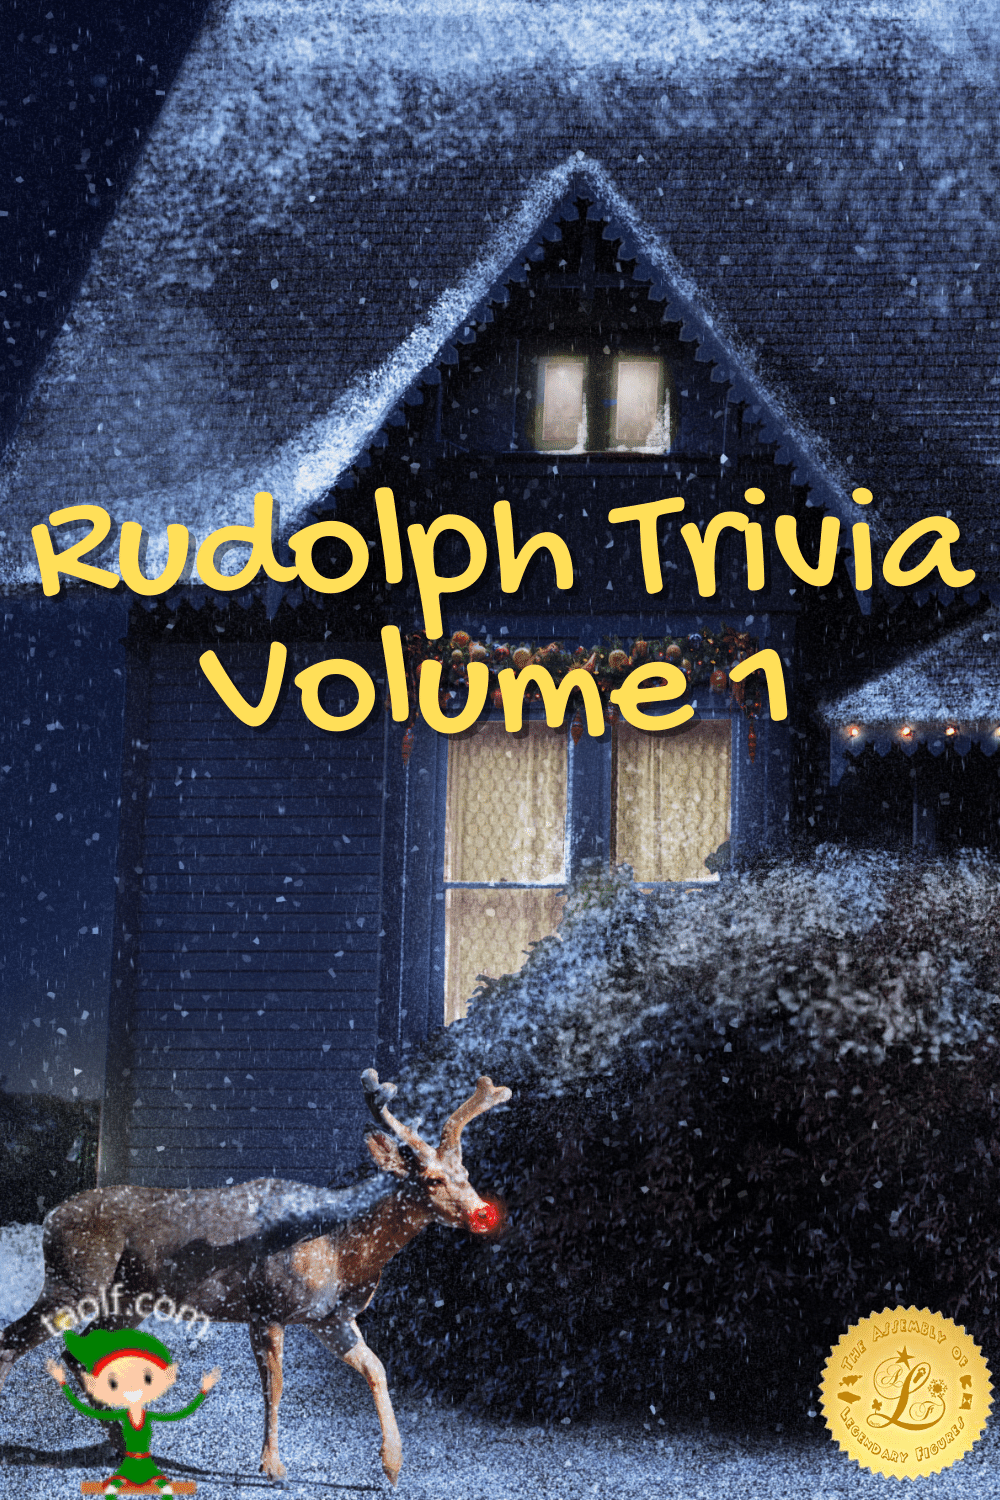 Rudolph Release New Trivia Game - Version 1